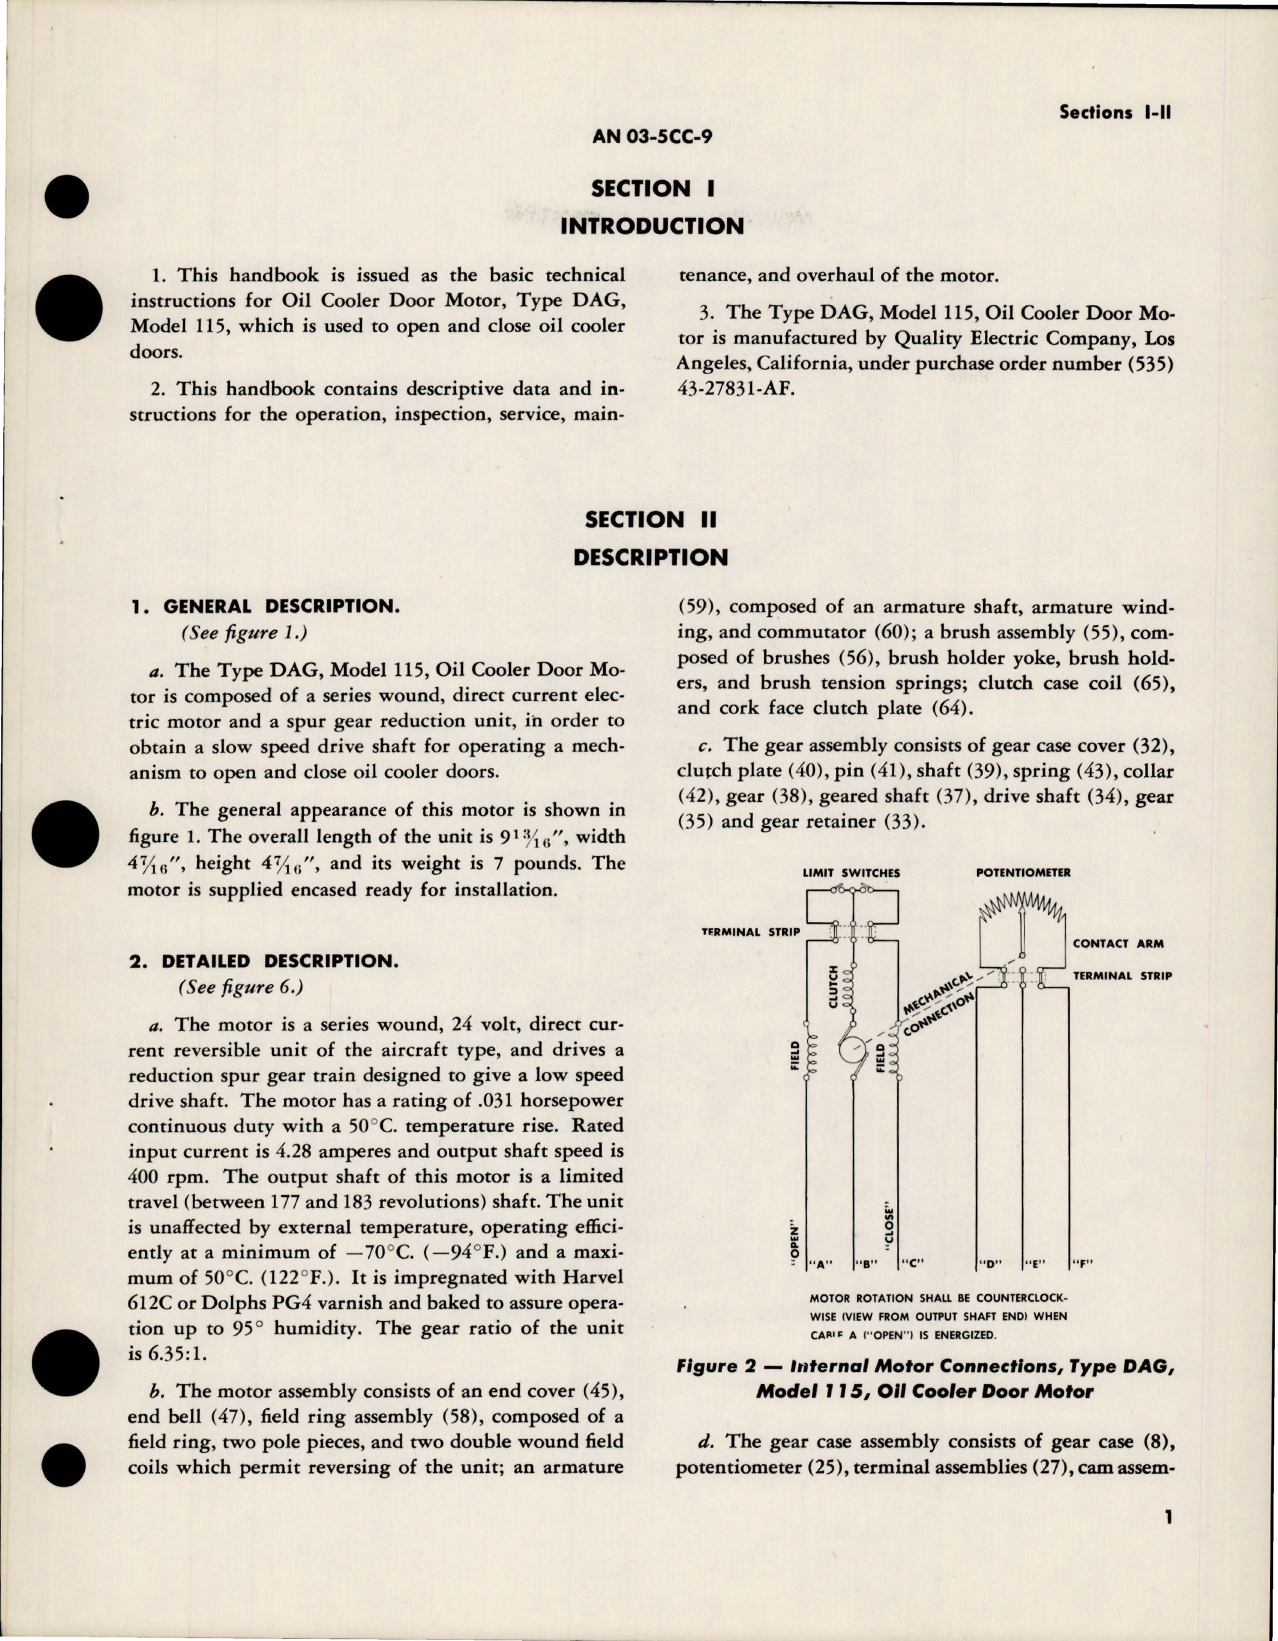 Sample page 5 from AirCorps Library document: Handbook of Instruction with Parts Catalog for Oil Cooler Door Motor - Type DAG Model 115 